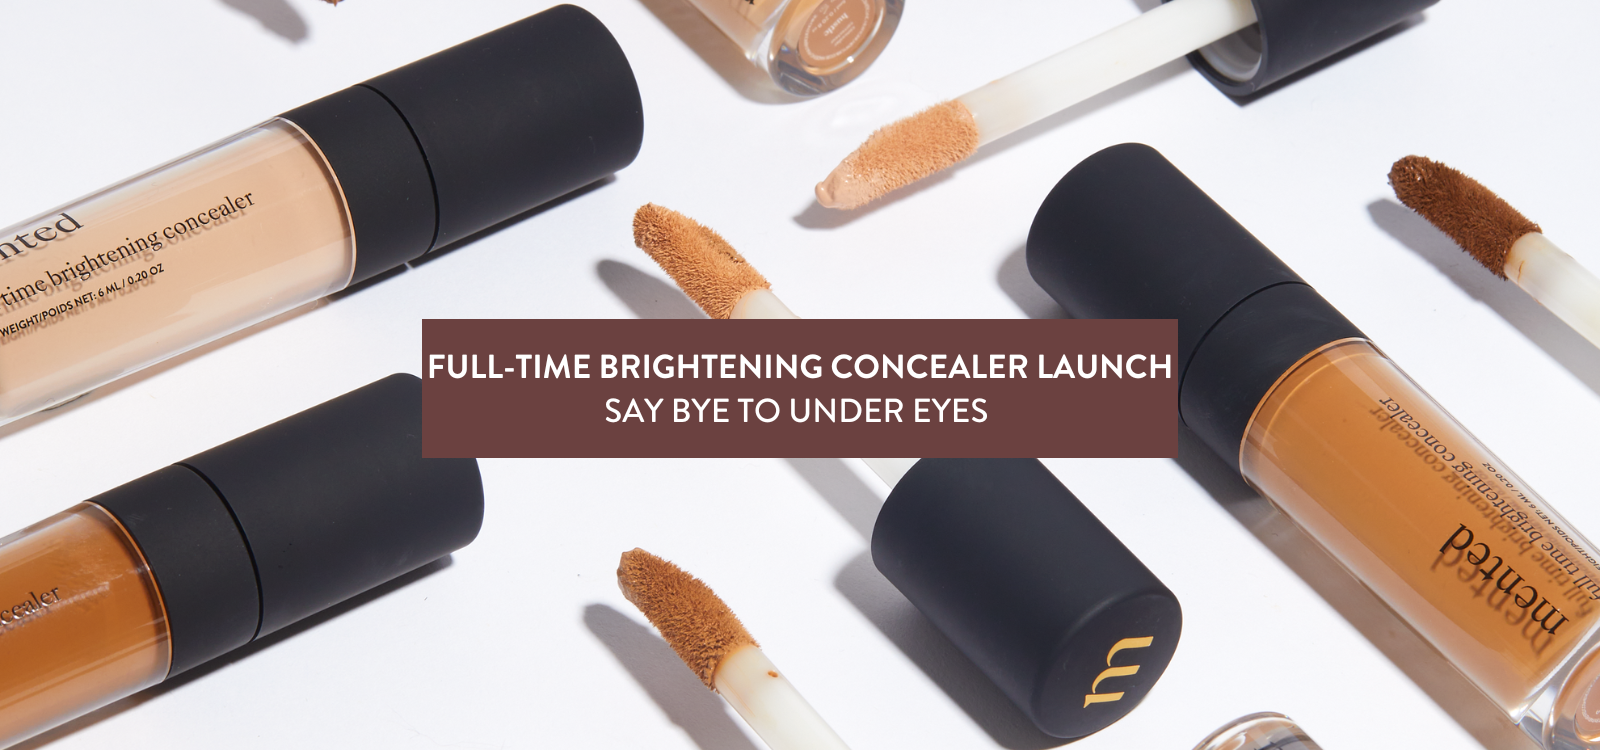 Full-Time Brightening Concealer Launch: Say Bye to Under Eyes